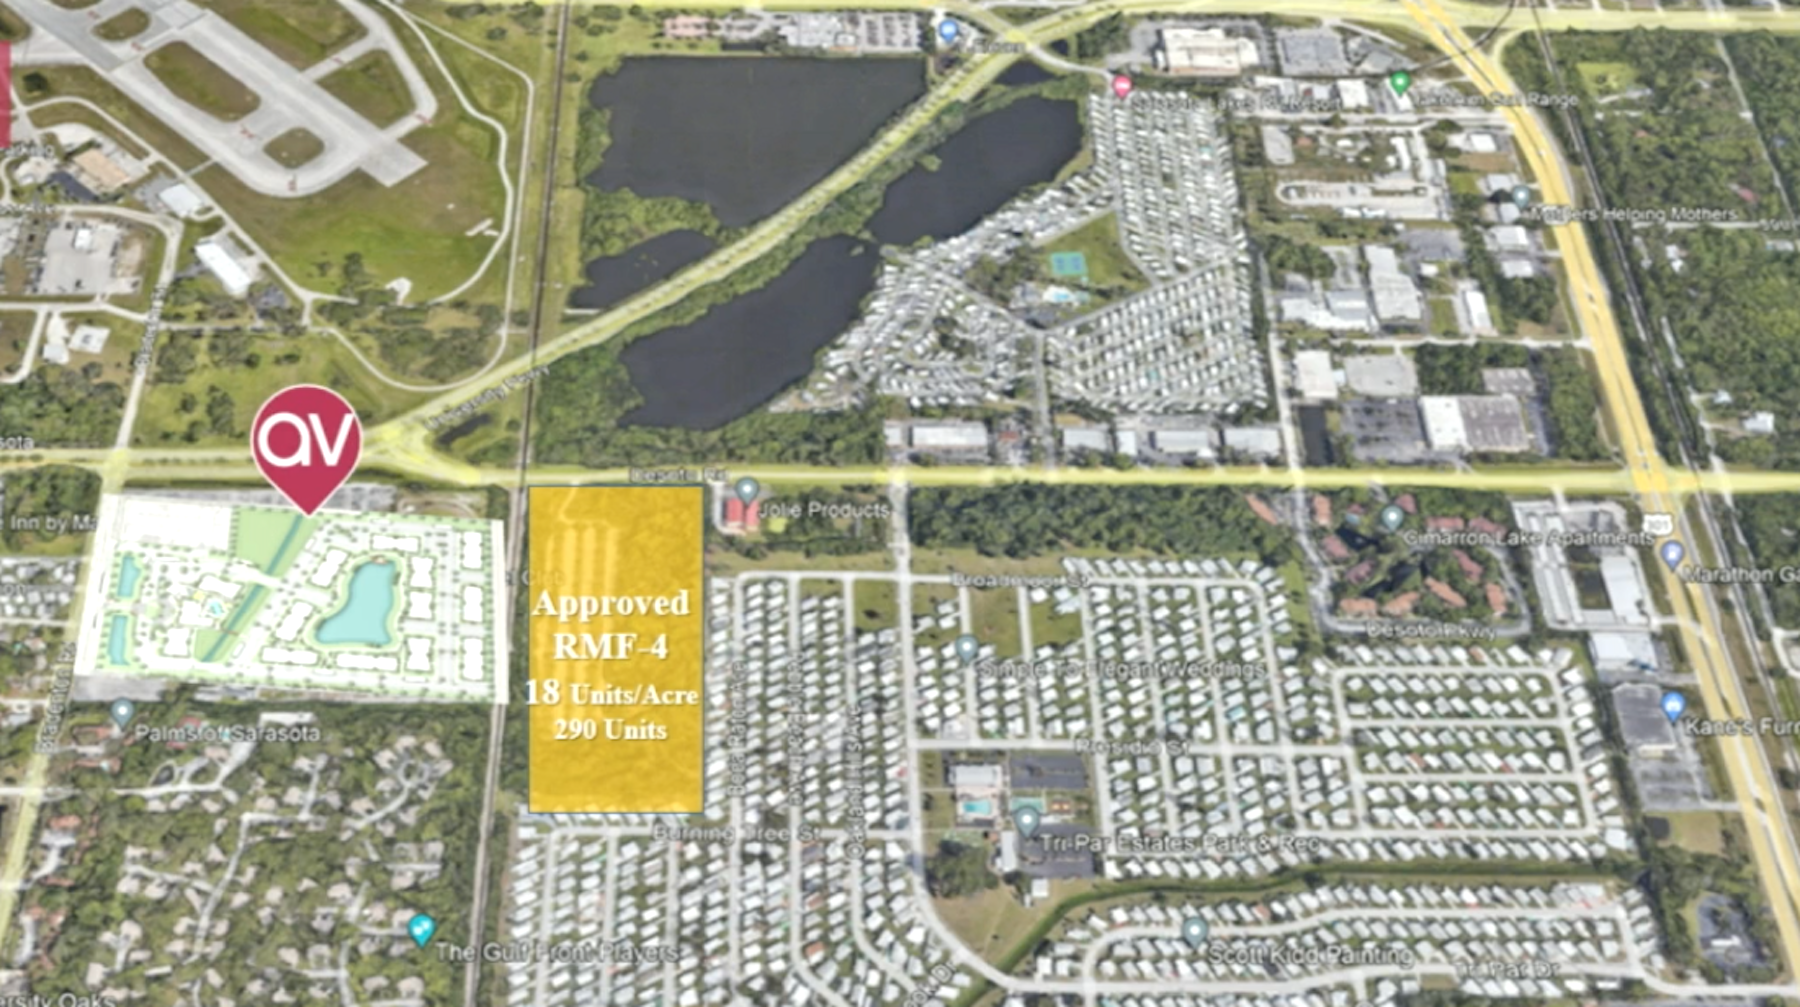 Aventon Companies plans to build a 372-unit apartment community, shaded in yellow, approximately 1,500 feet from the end of the runway at Sarasota-Bradenton International Airport. (Courtesy)